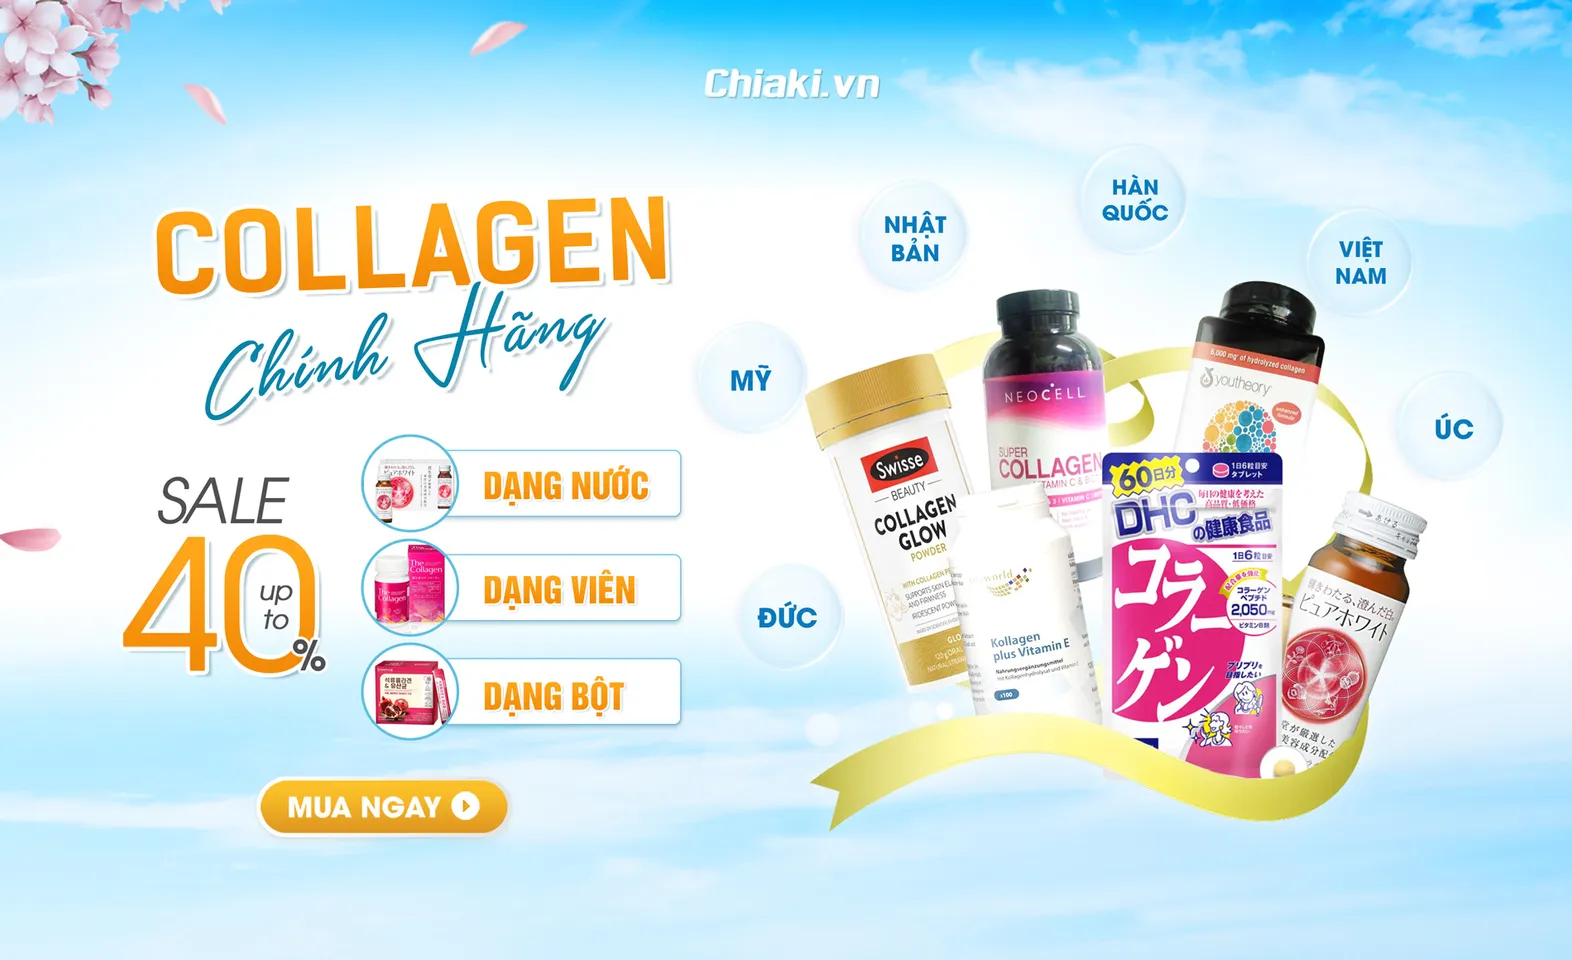 Collagen Sale Up To 40%